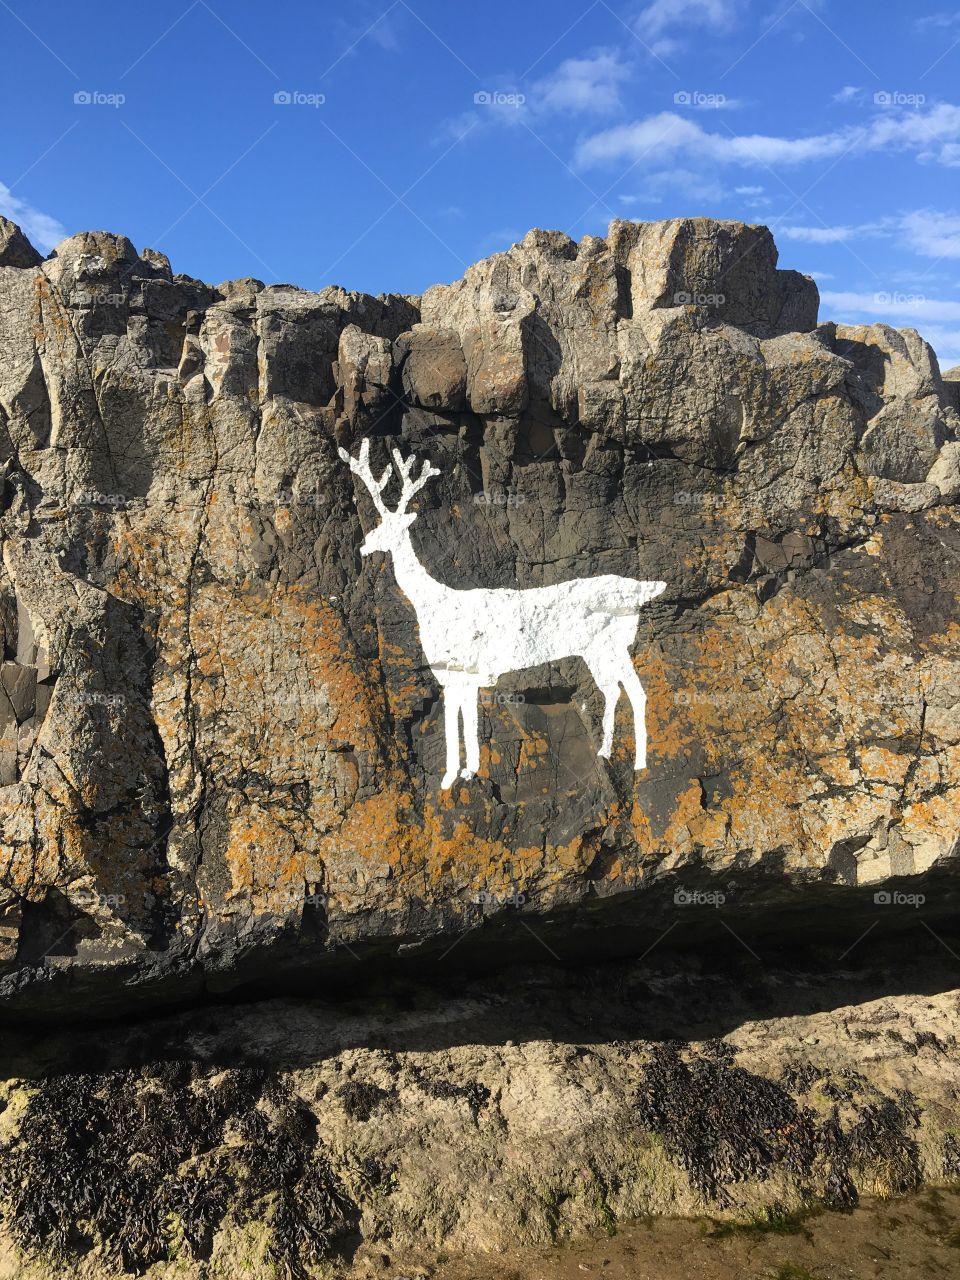 Stag rocks of Bamburgh, home to many varieties of wildlife, and so named because of the magnificent white-painted stag found painted onto the cliff face there.